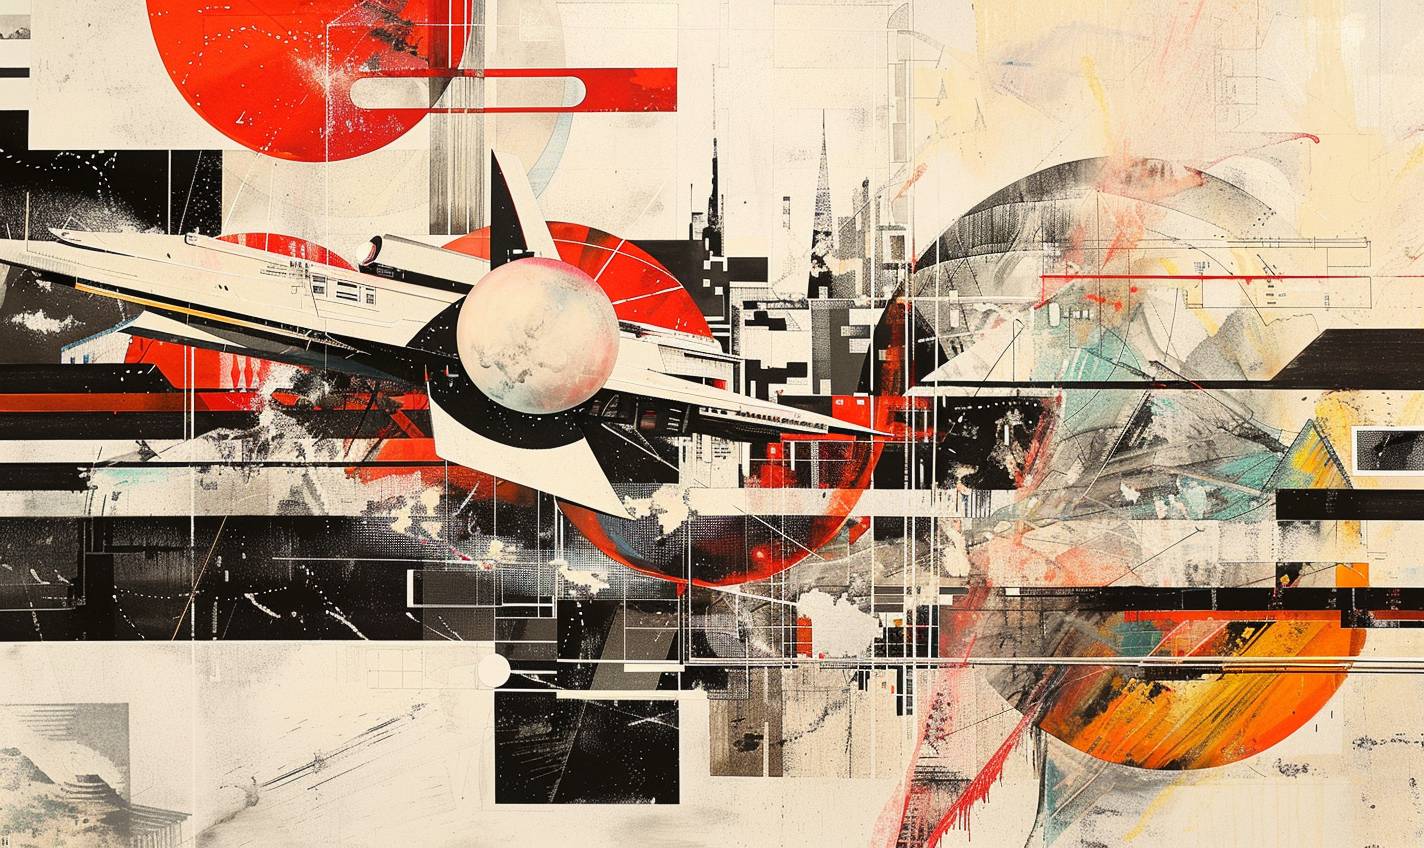 In the style of El Lissitzky, a cybernetic cityscape teeming with artificial life